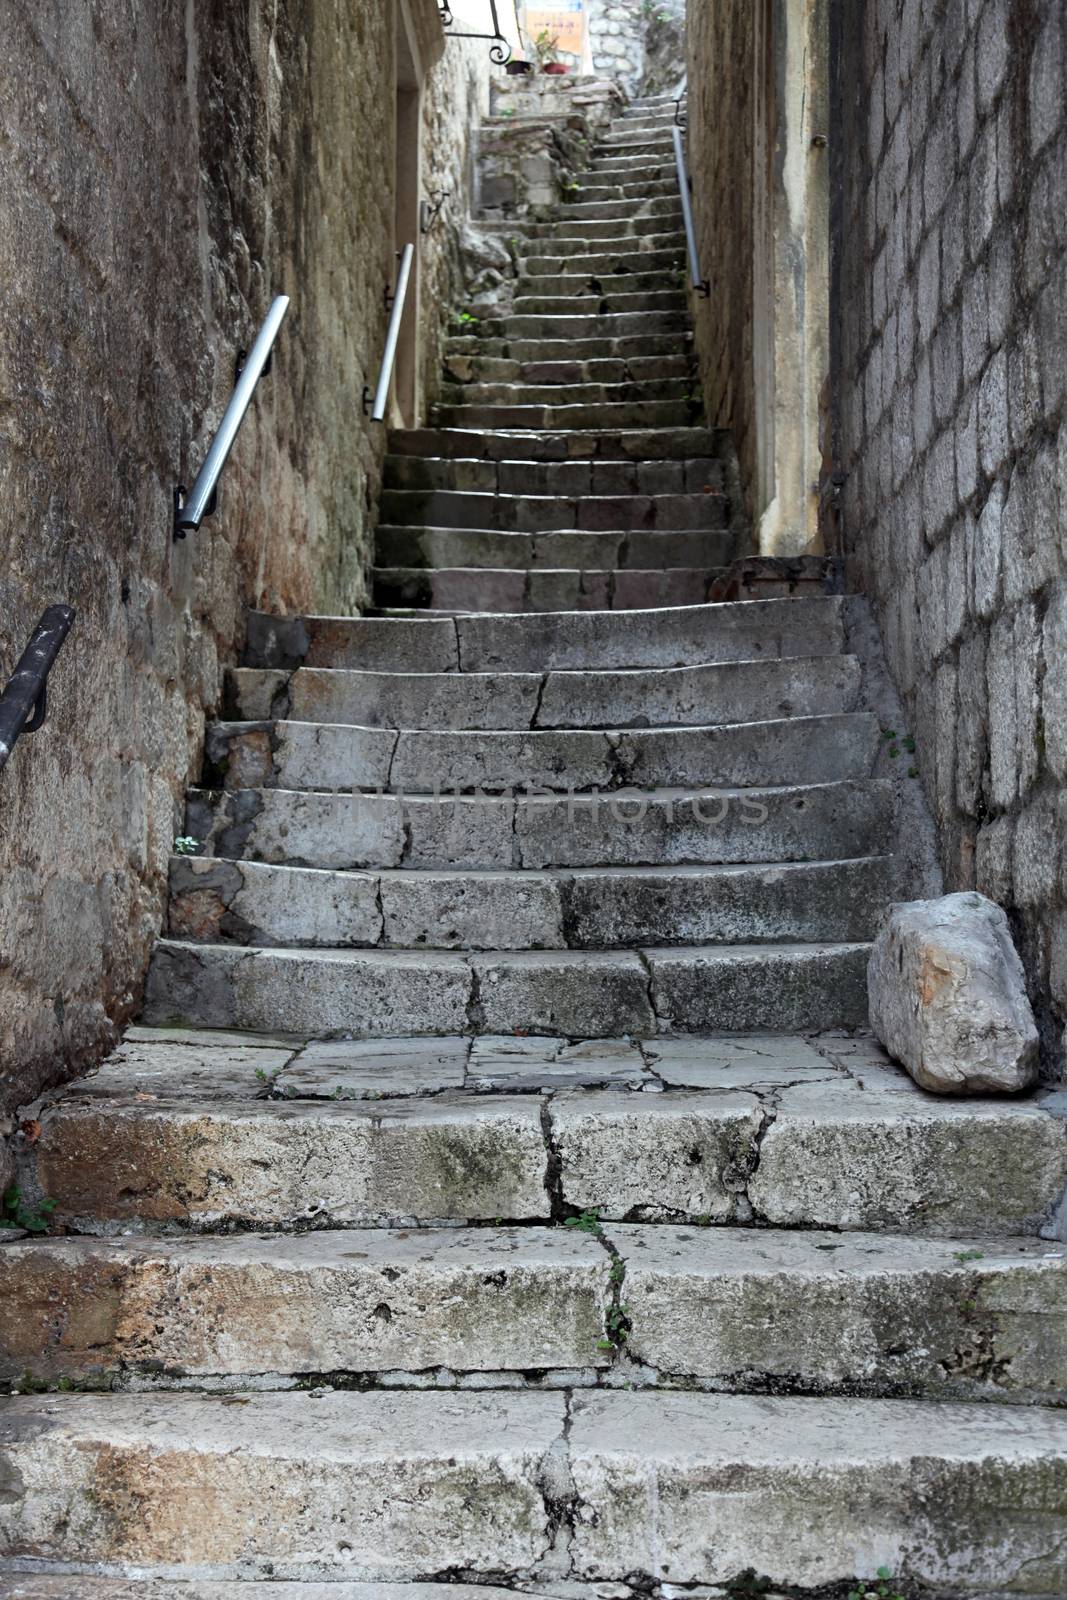 Stairs in the old town of Kotor on Adriatic coast of Montenegro.